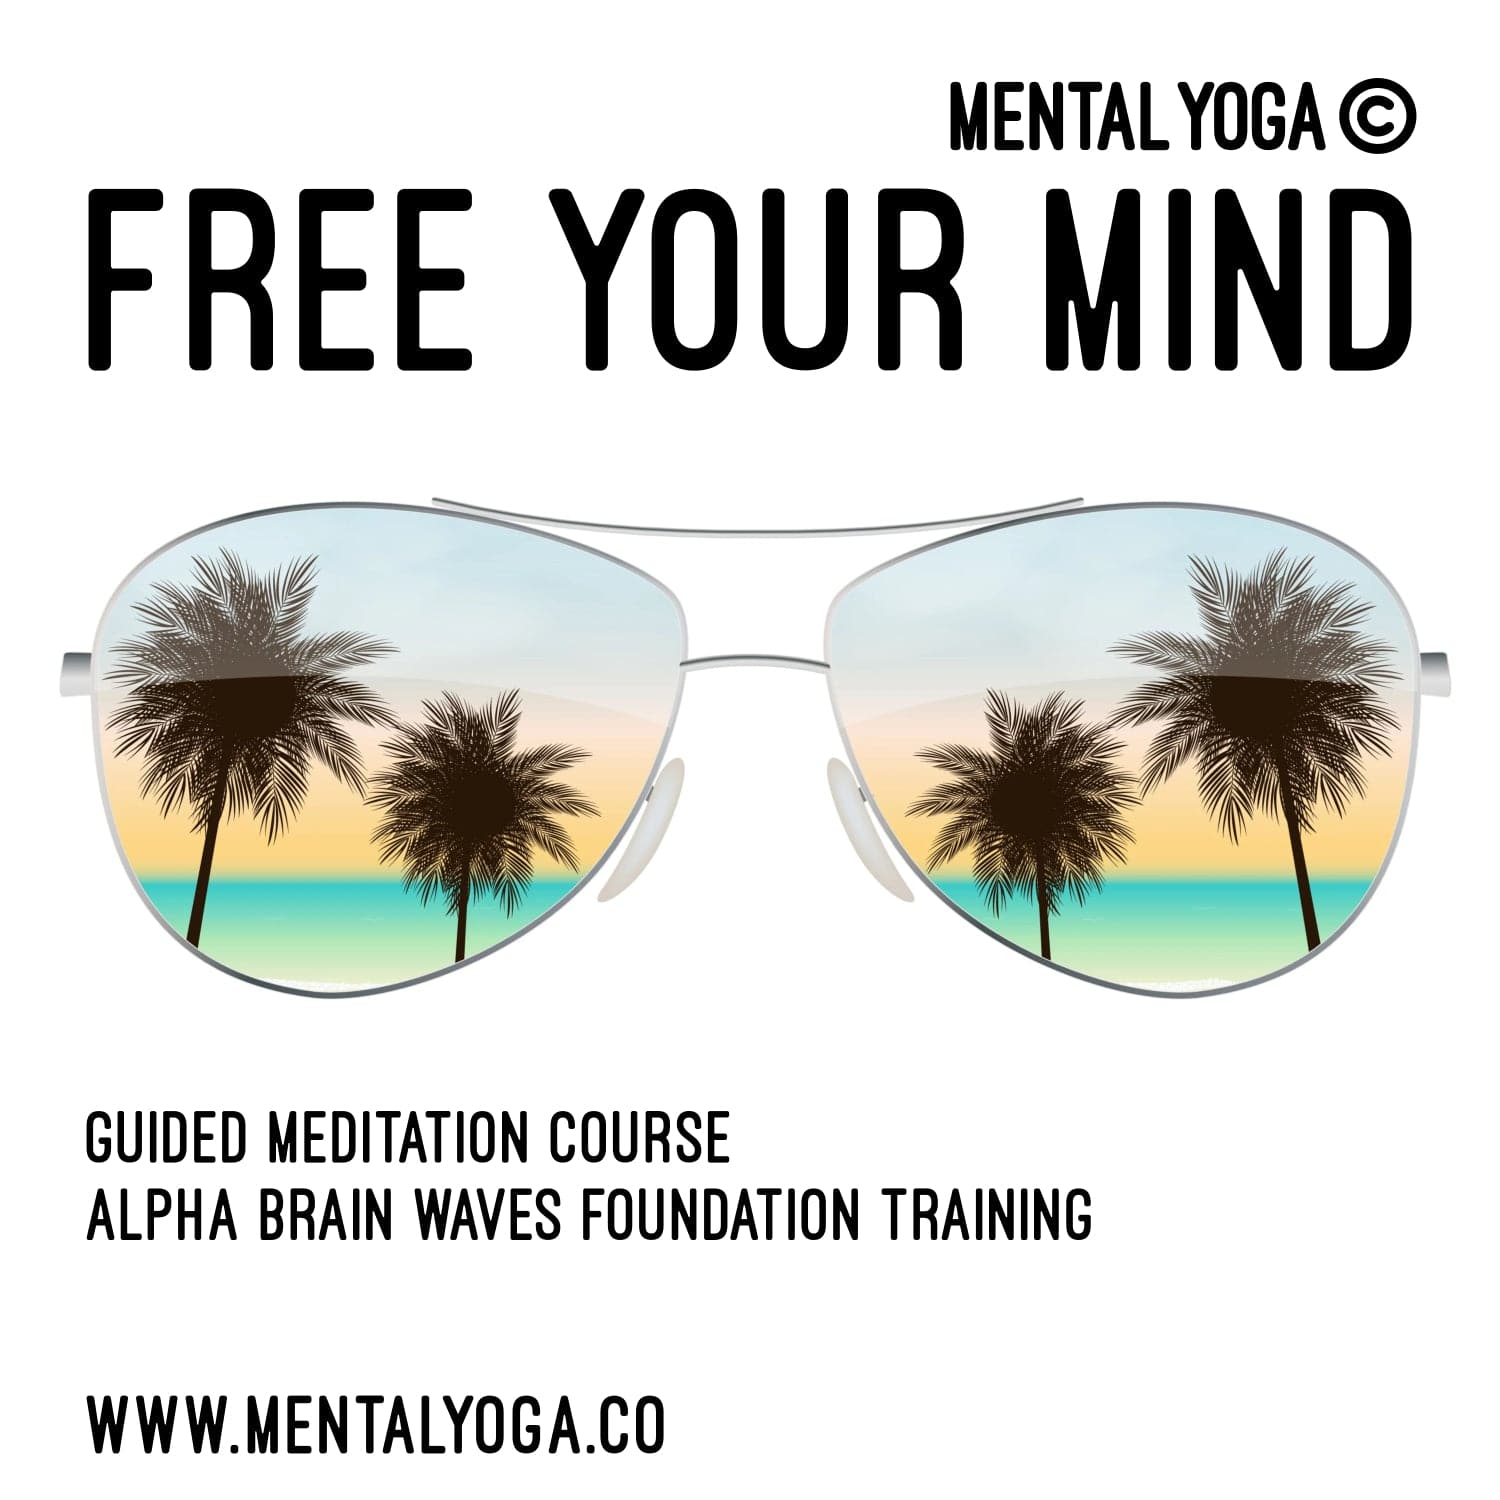 Free Your Mind - Life coach | Private Coaching and mediation services | Mental Yoga - Mental Yoga